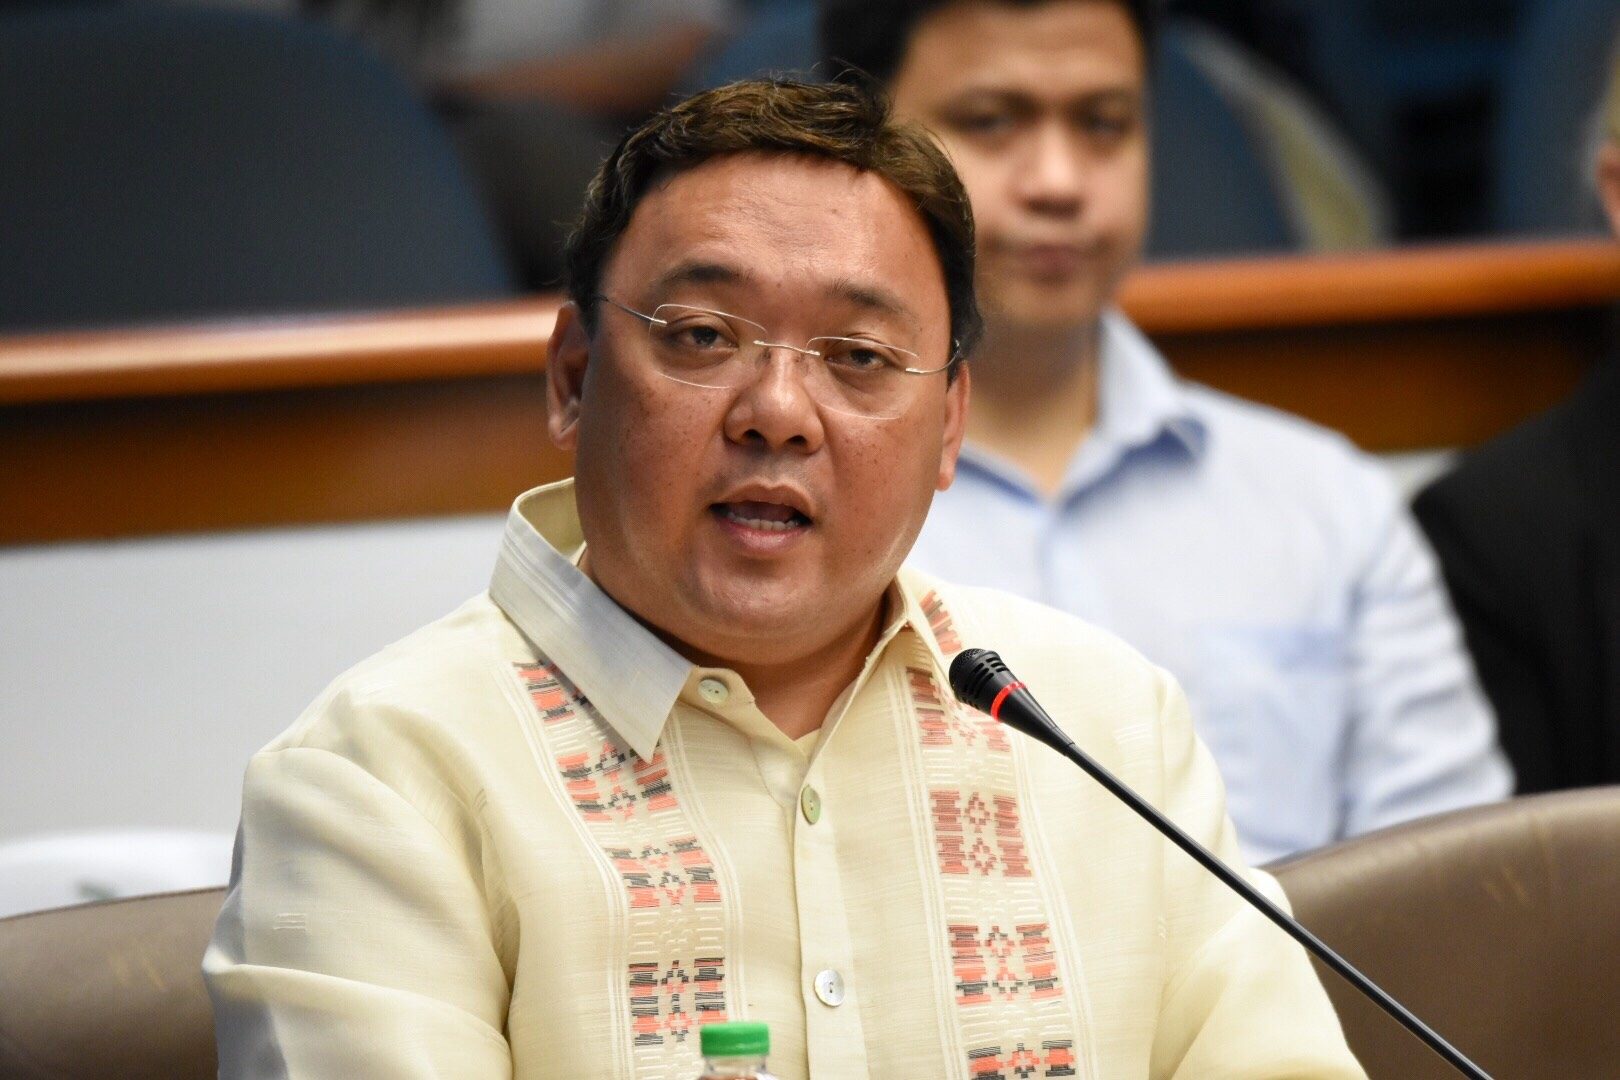 Roque says he'll resign if Poe's 'fake news' bill becomes law